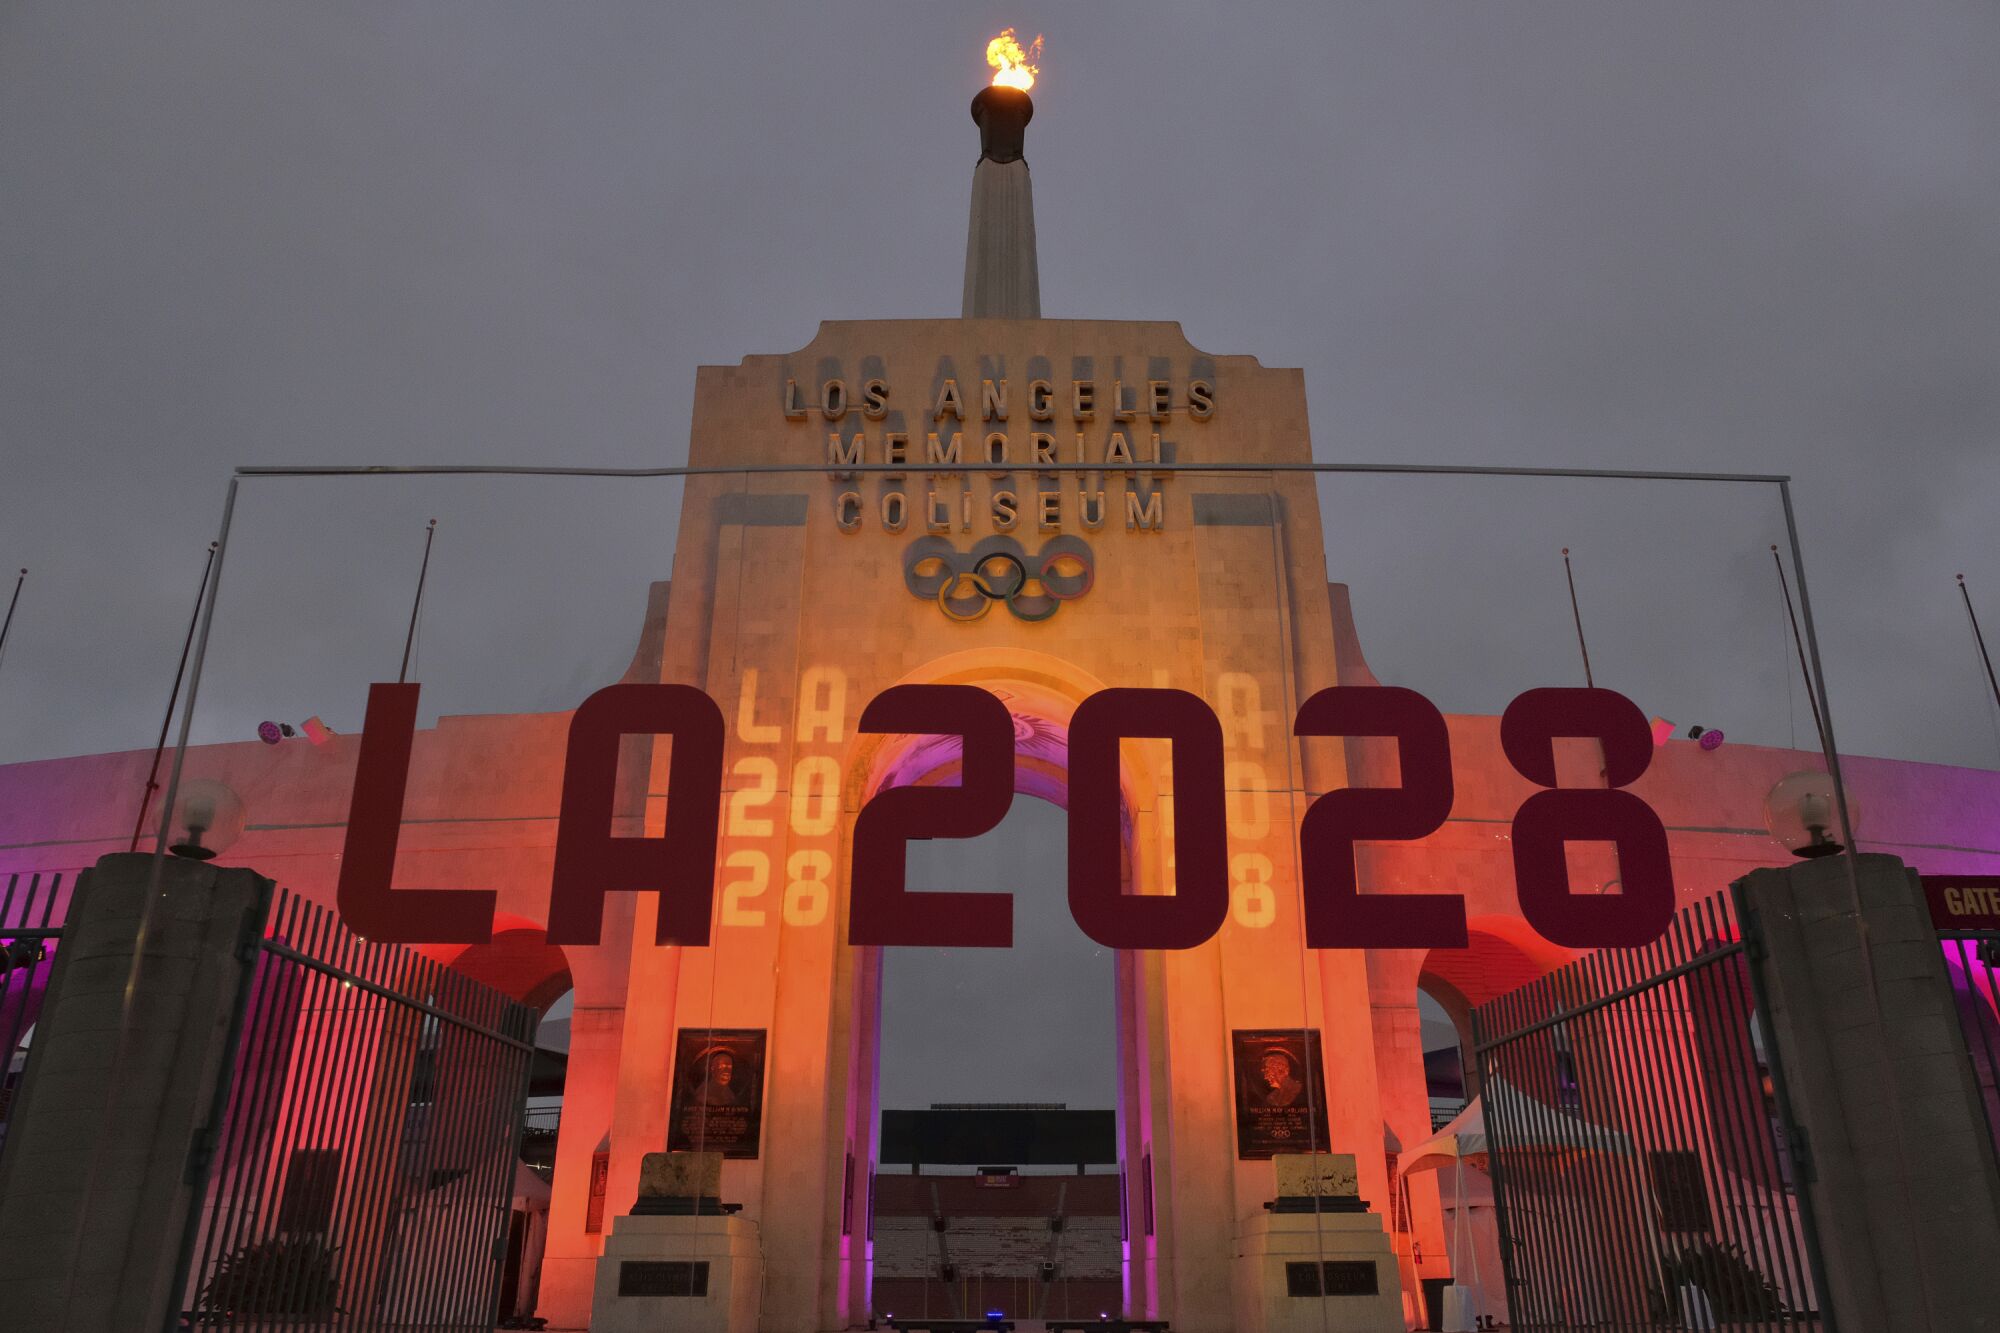 An LA 2028 sign is seen in front of a blazing Olympic cauldron at the Los Angeles Memorial Coliseum.